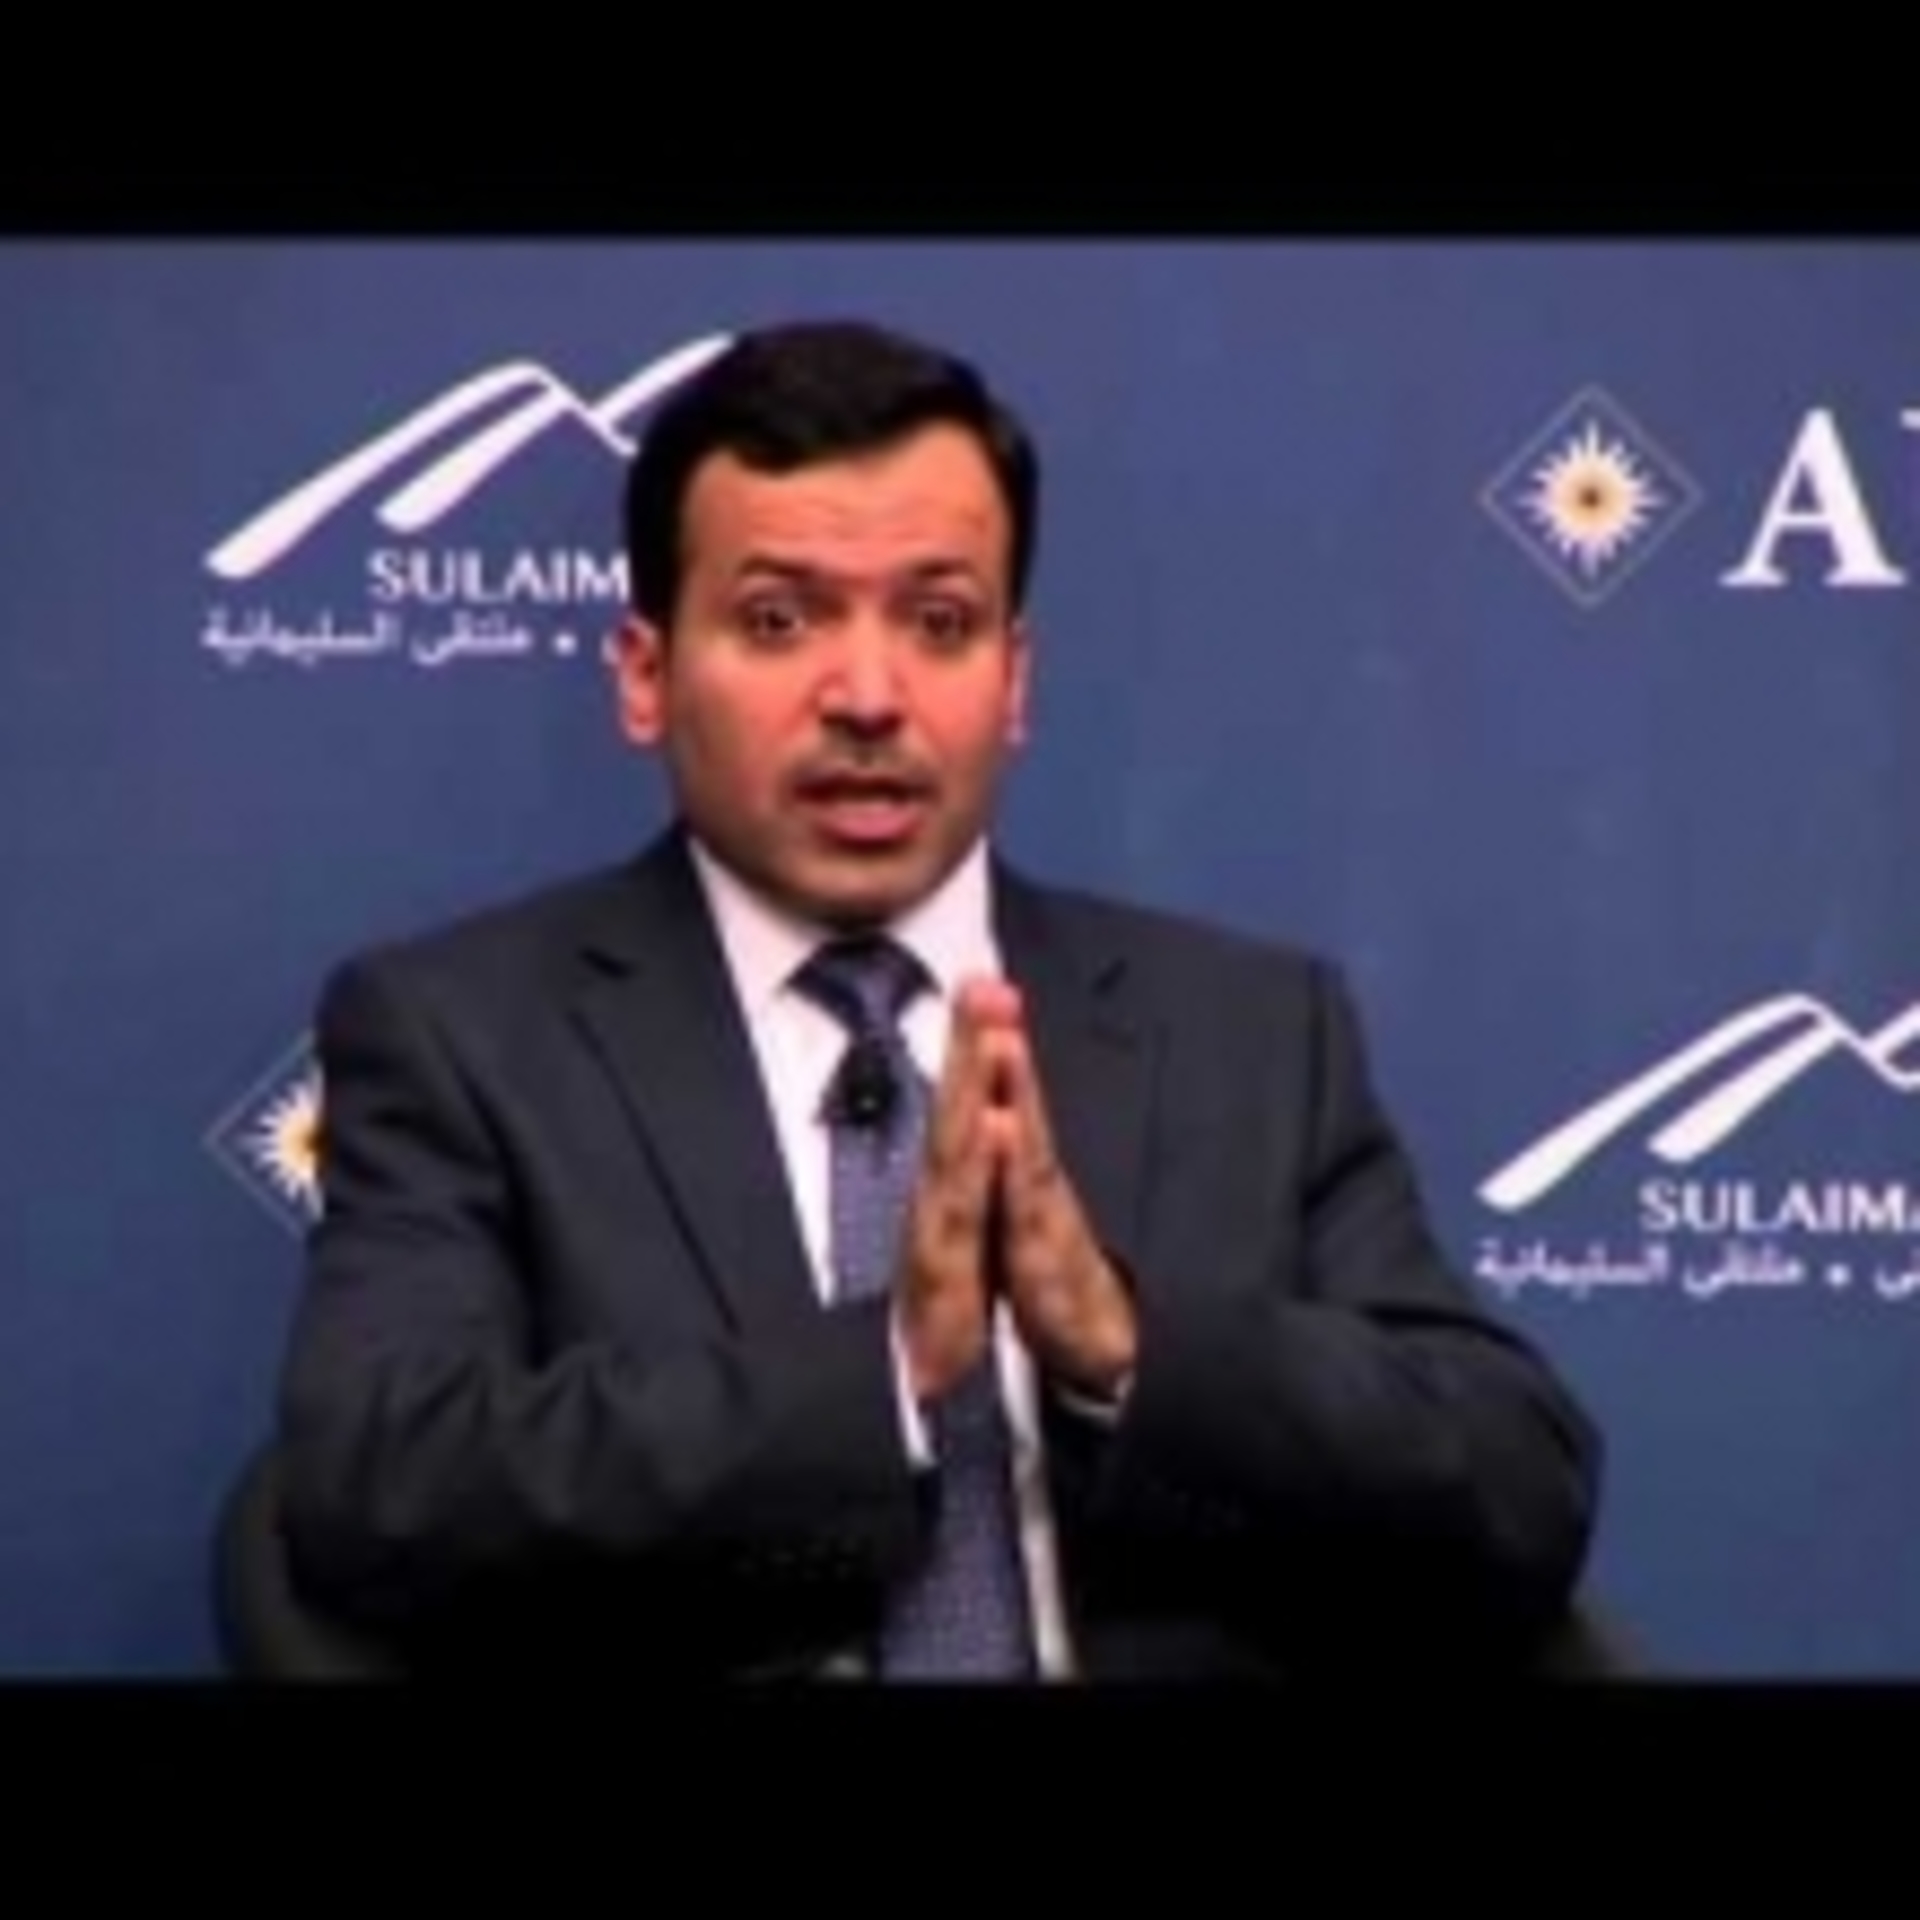 Sulaimani Forum 2016 Panel 2: Day After - Prospects for Iraq